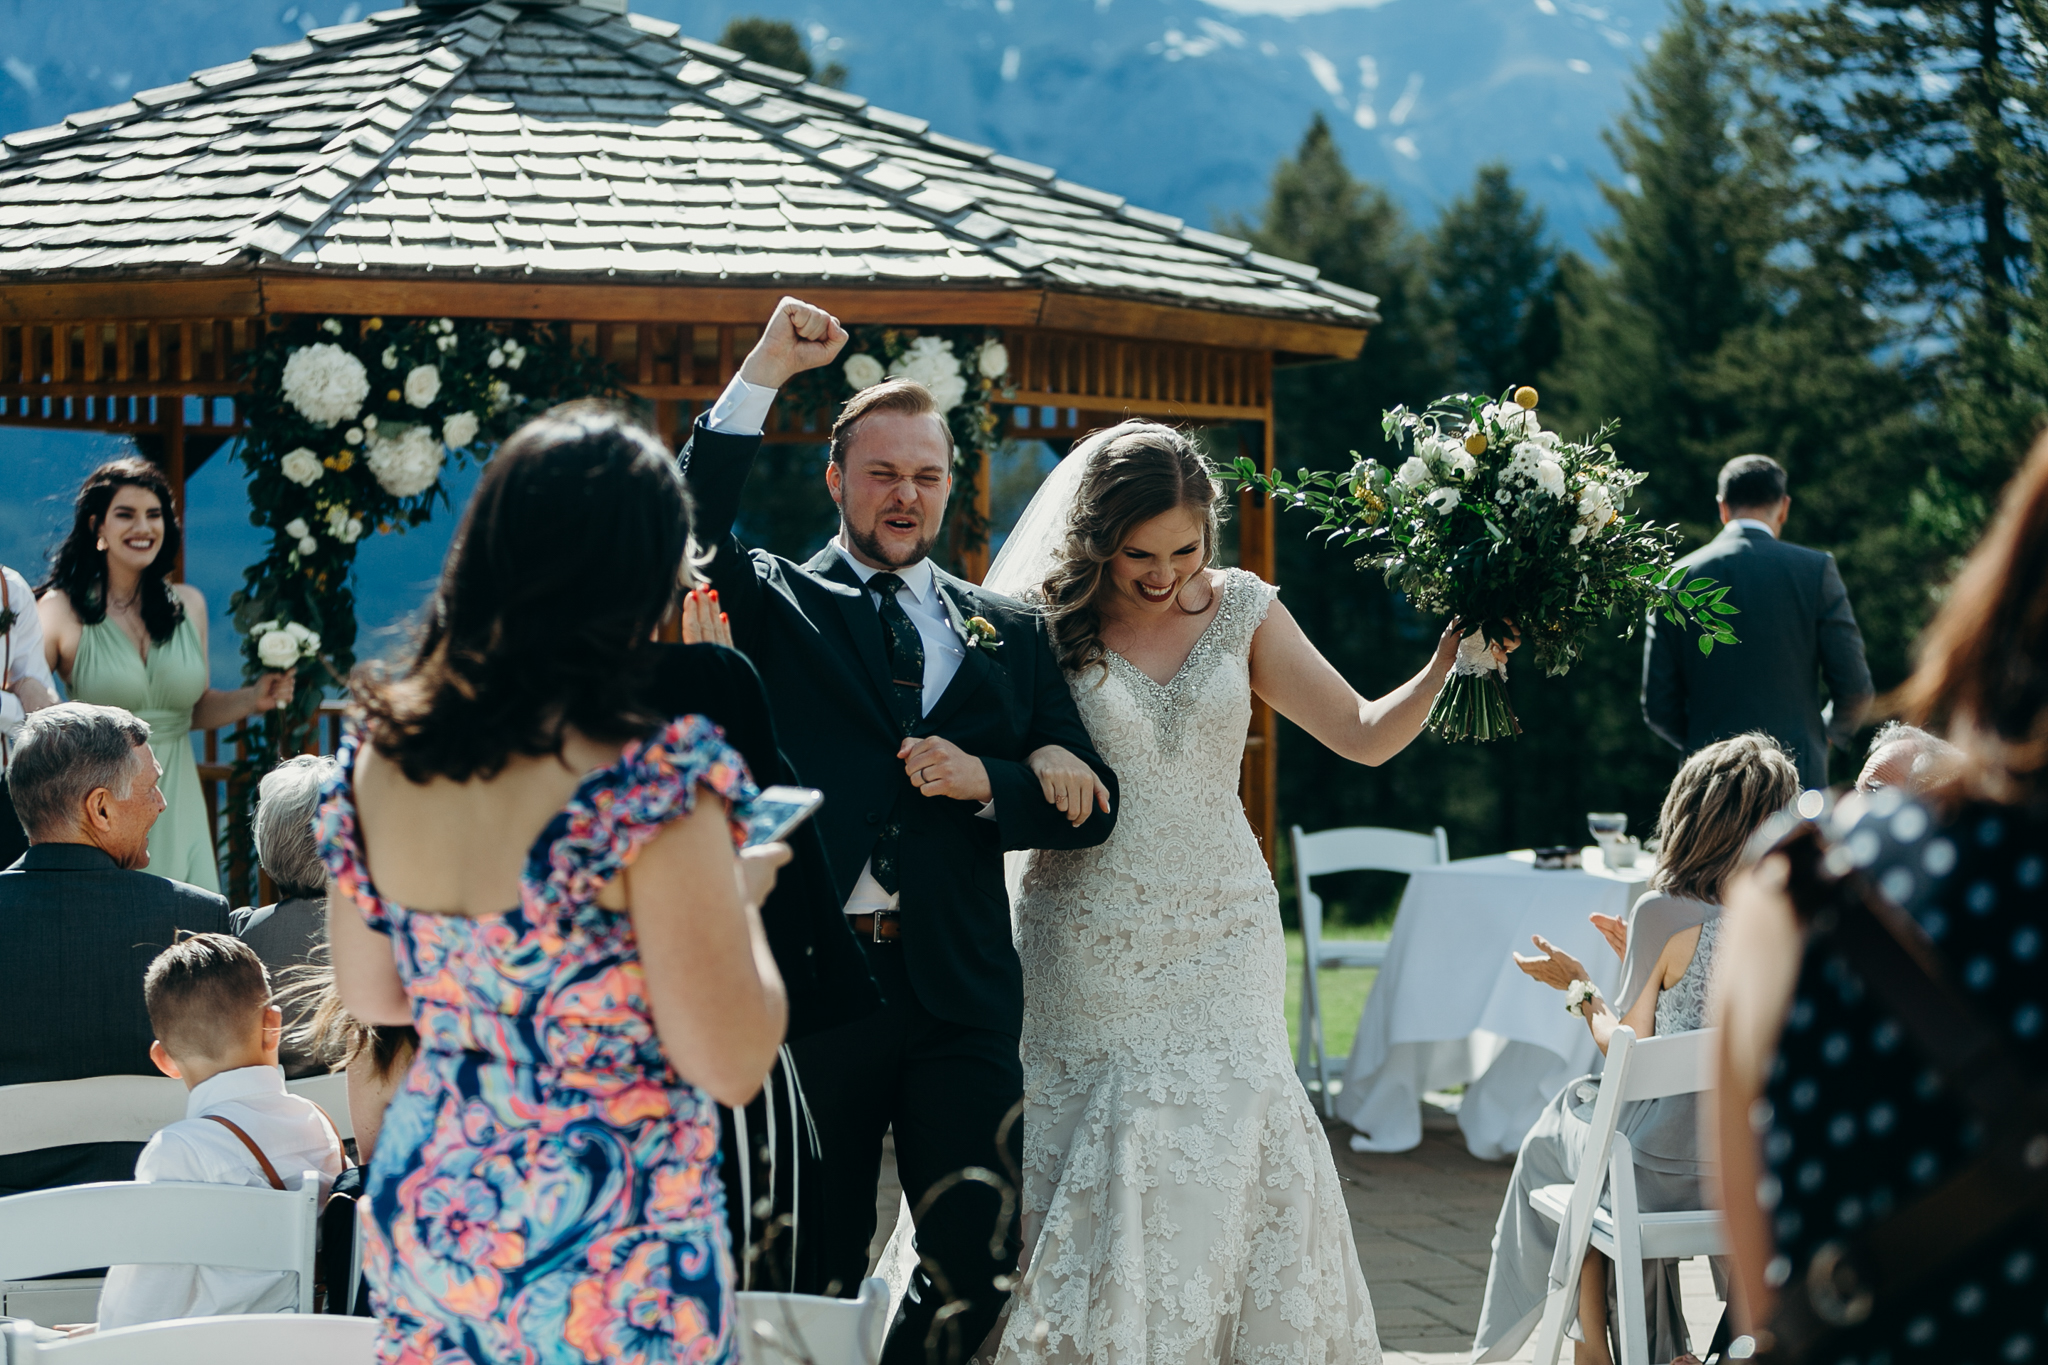 Bride and groom celebrate Wedding ceremony at gazebo Silvertip Resort Canmore AB rocky mountain wedding